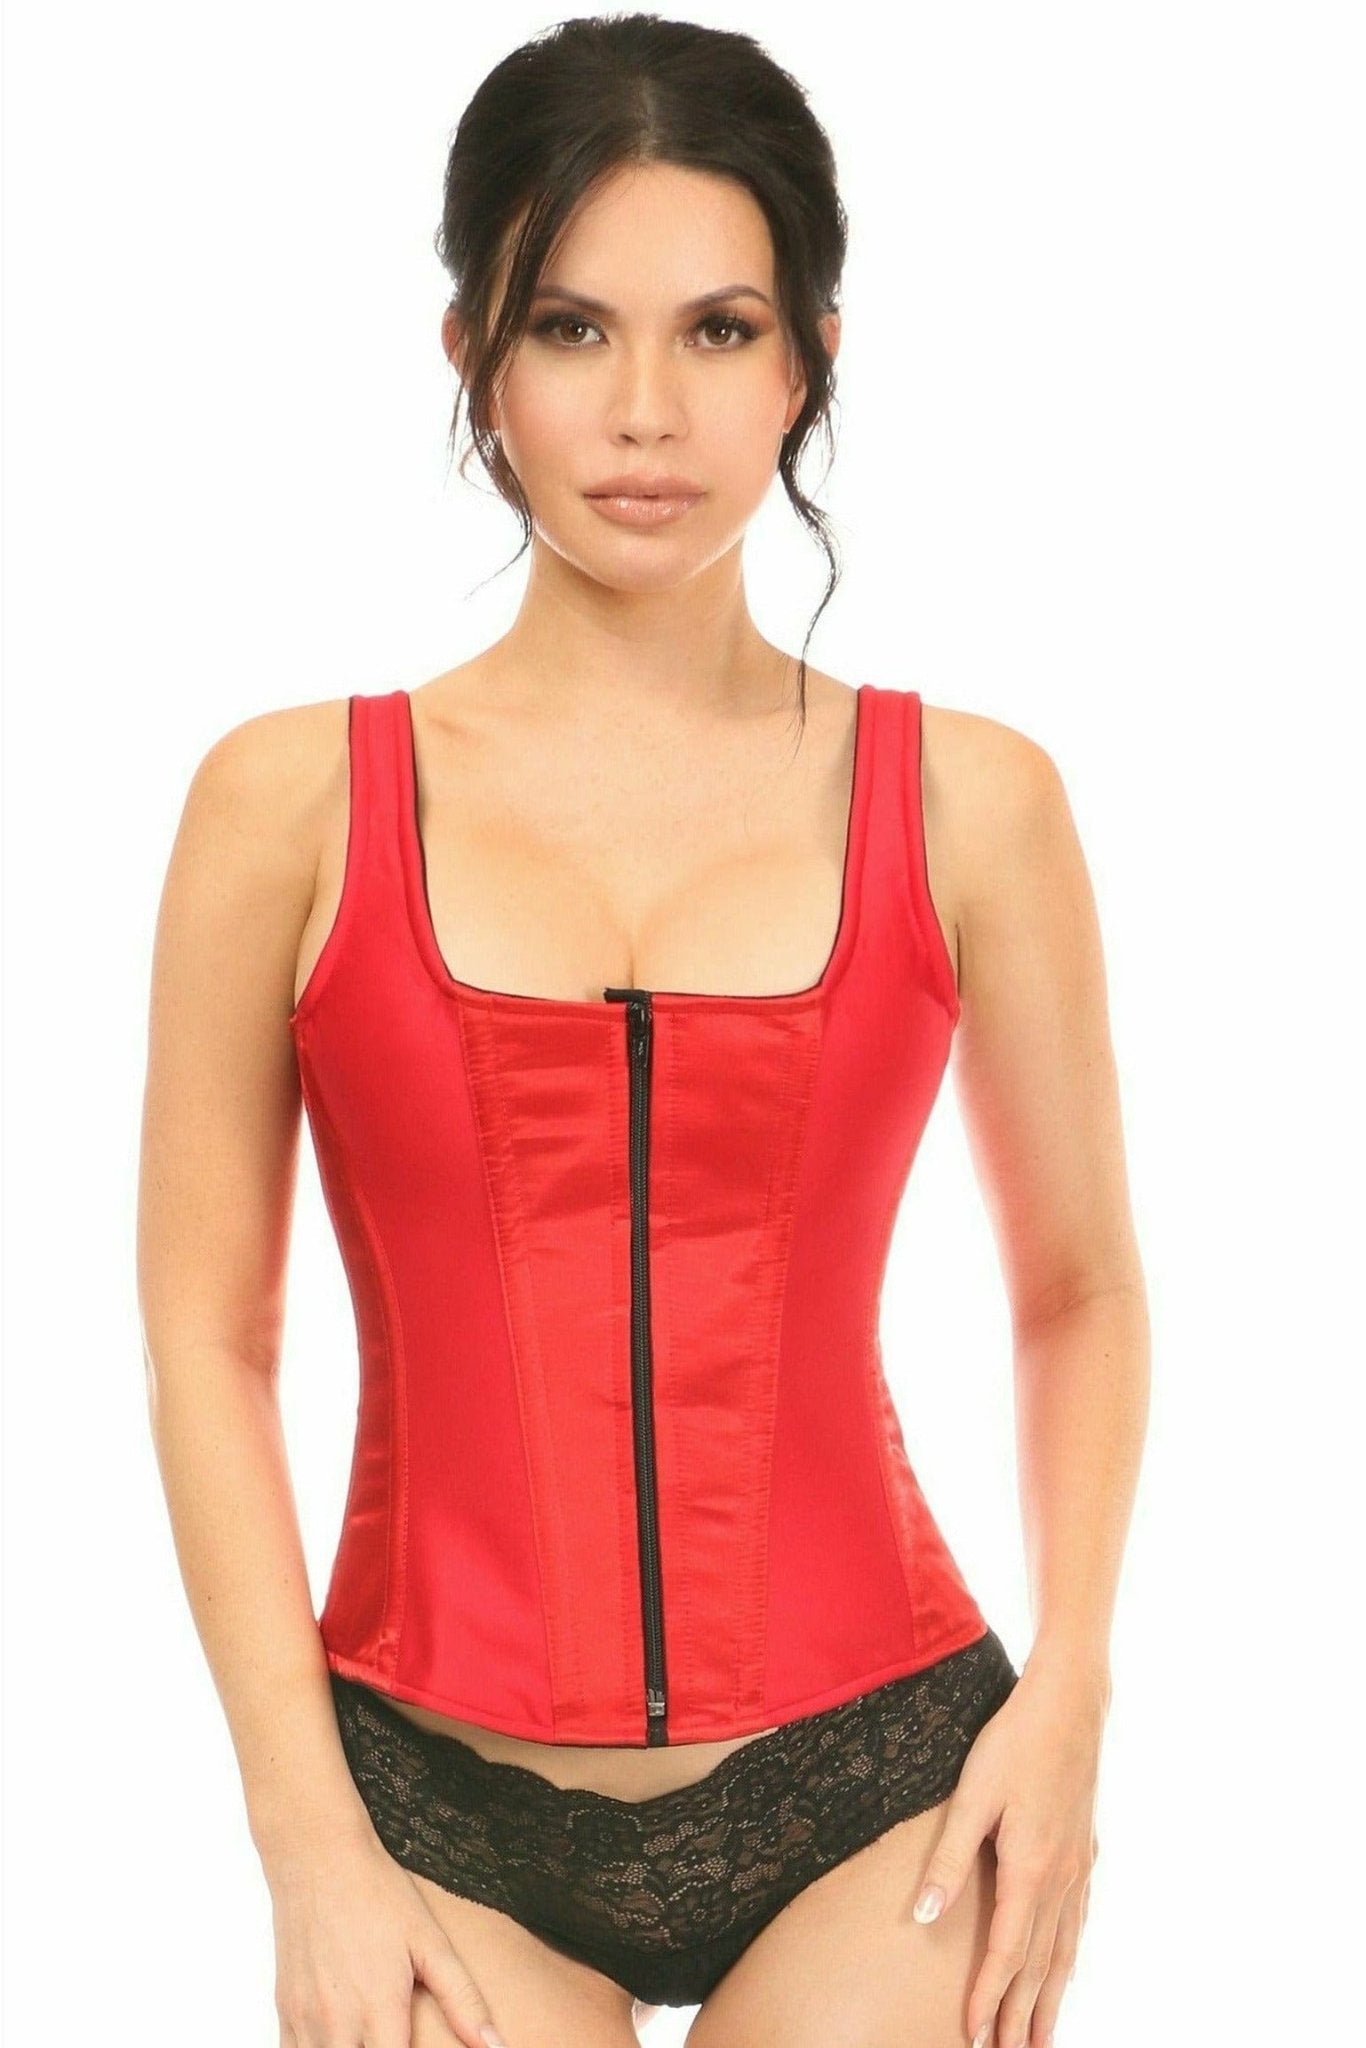 Deluxe Red Satin Steel Boned Corset with Straps Musotica.com